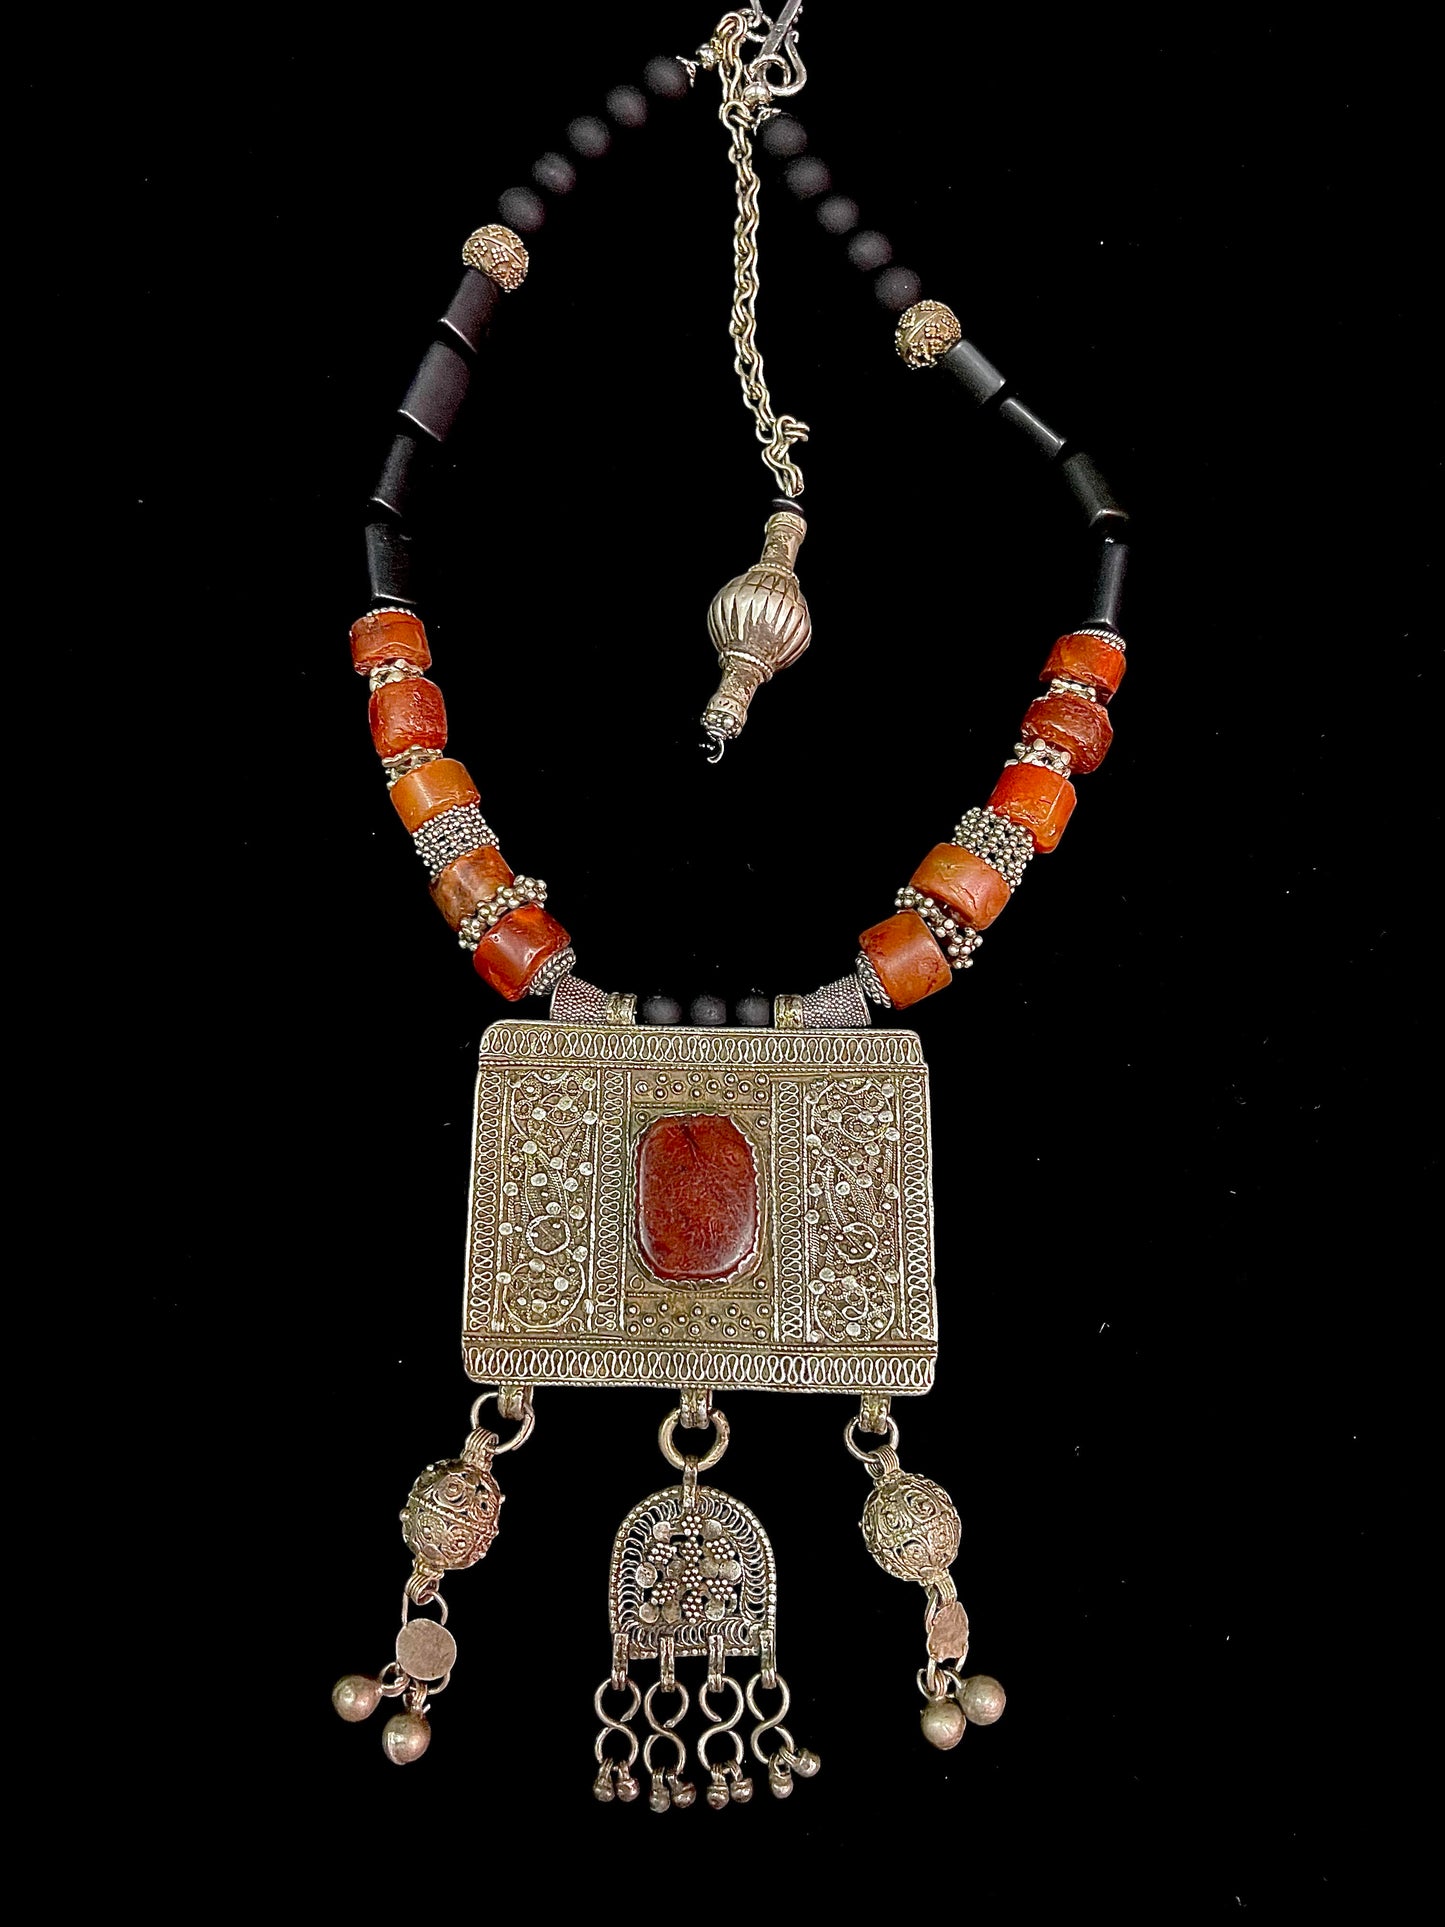 Antique silver Yemeni Box pendant with Carnelian inset. Strung with old carnelian and matte black onyx